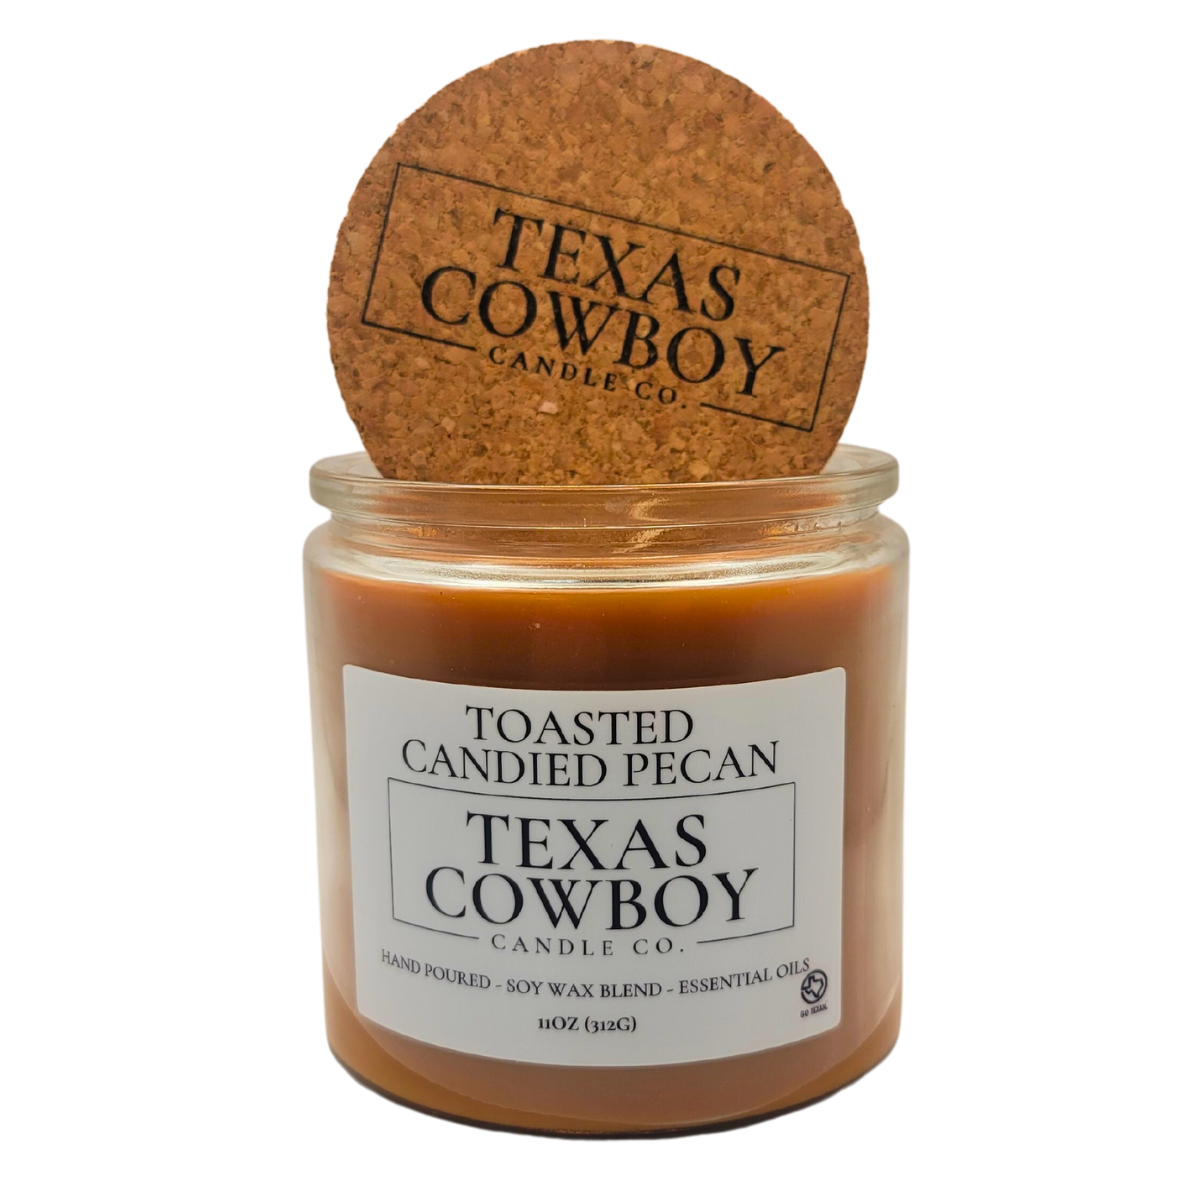 Toasted Candied Pecan Candle